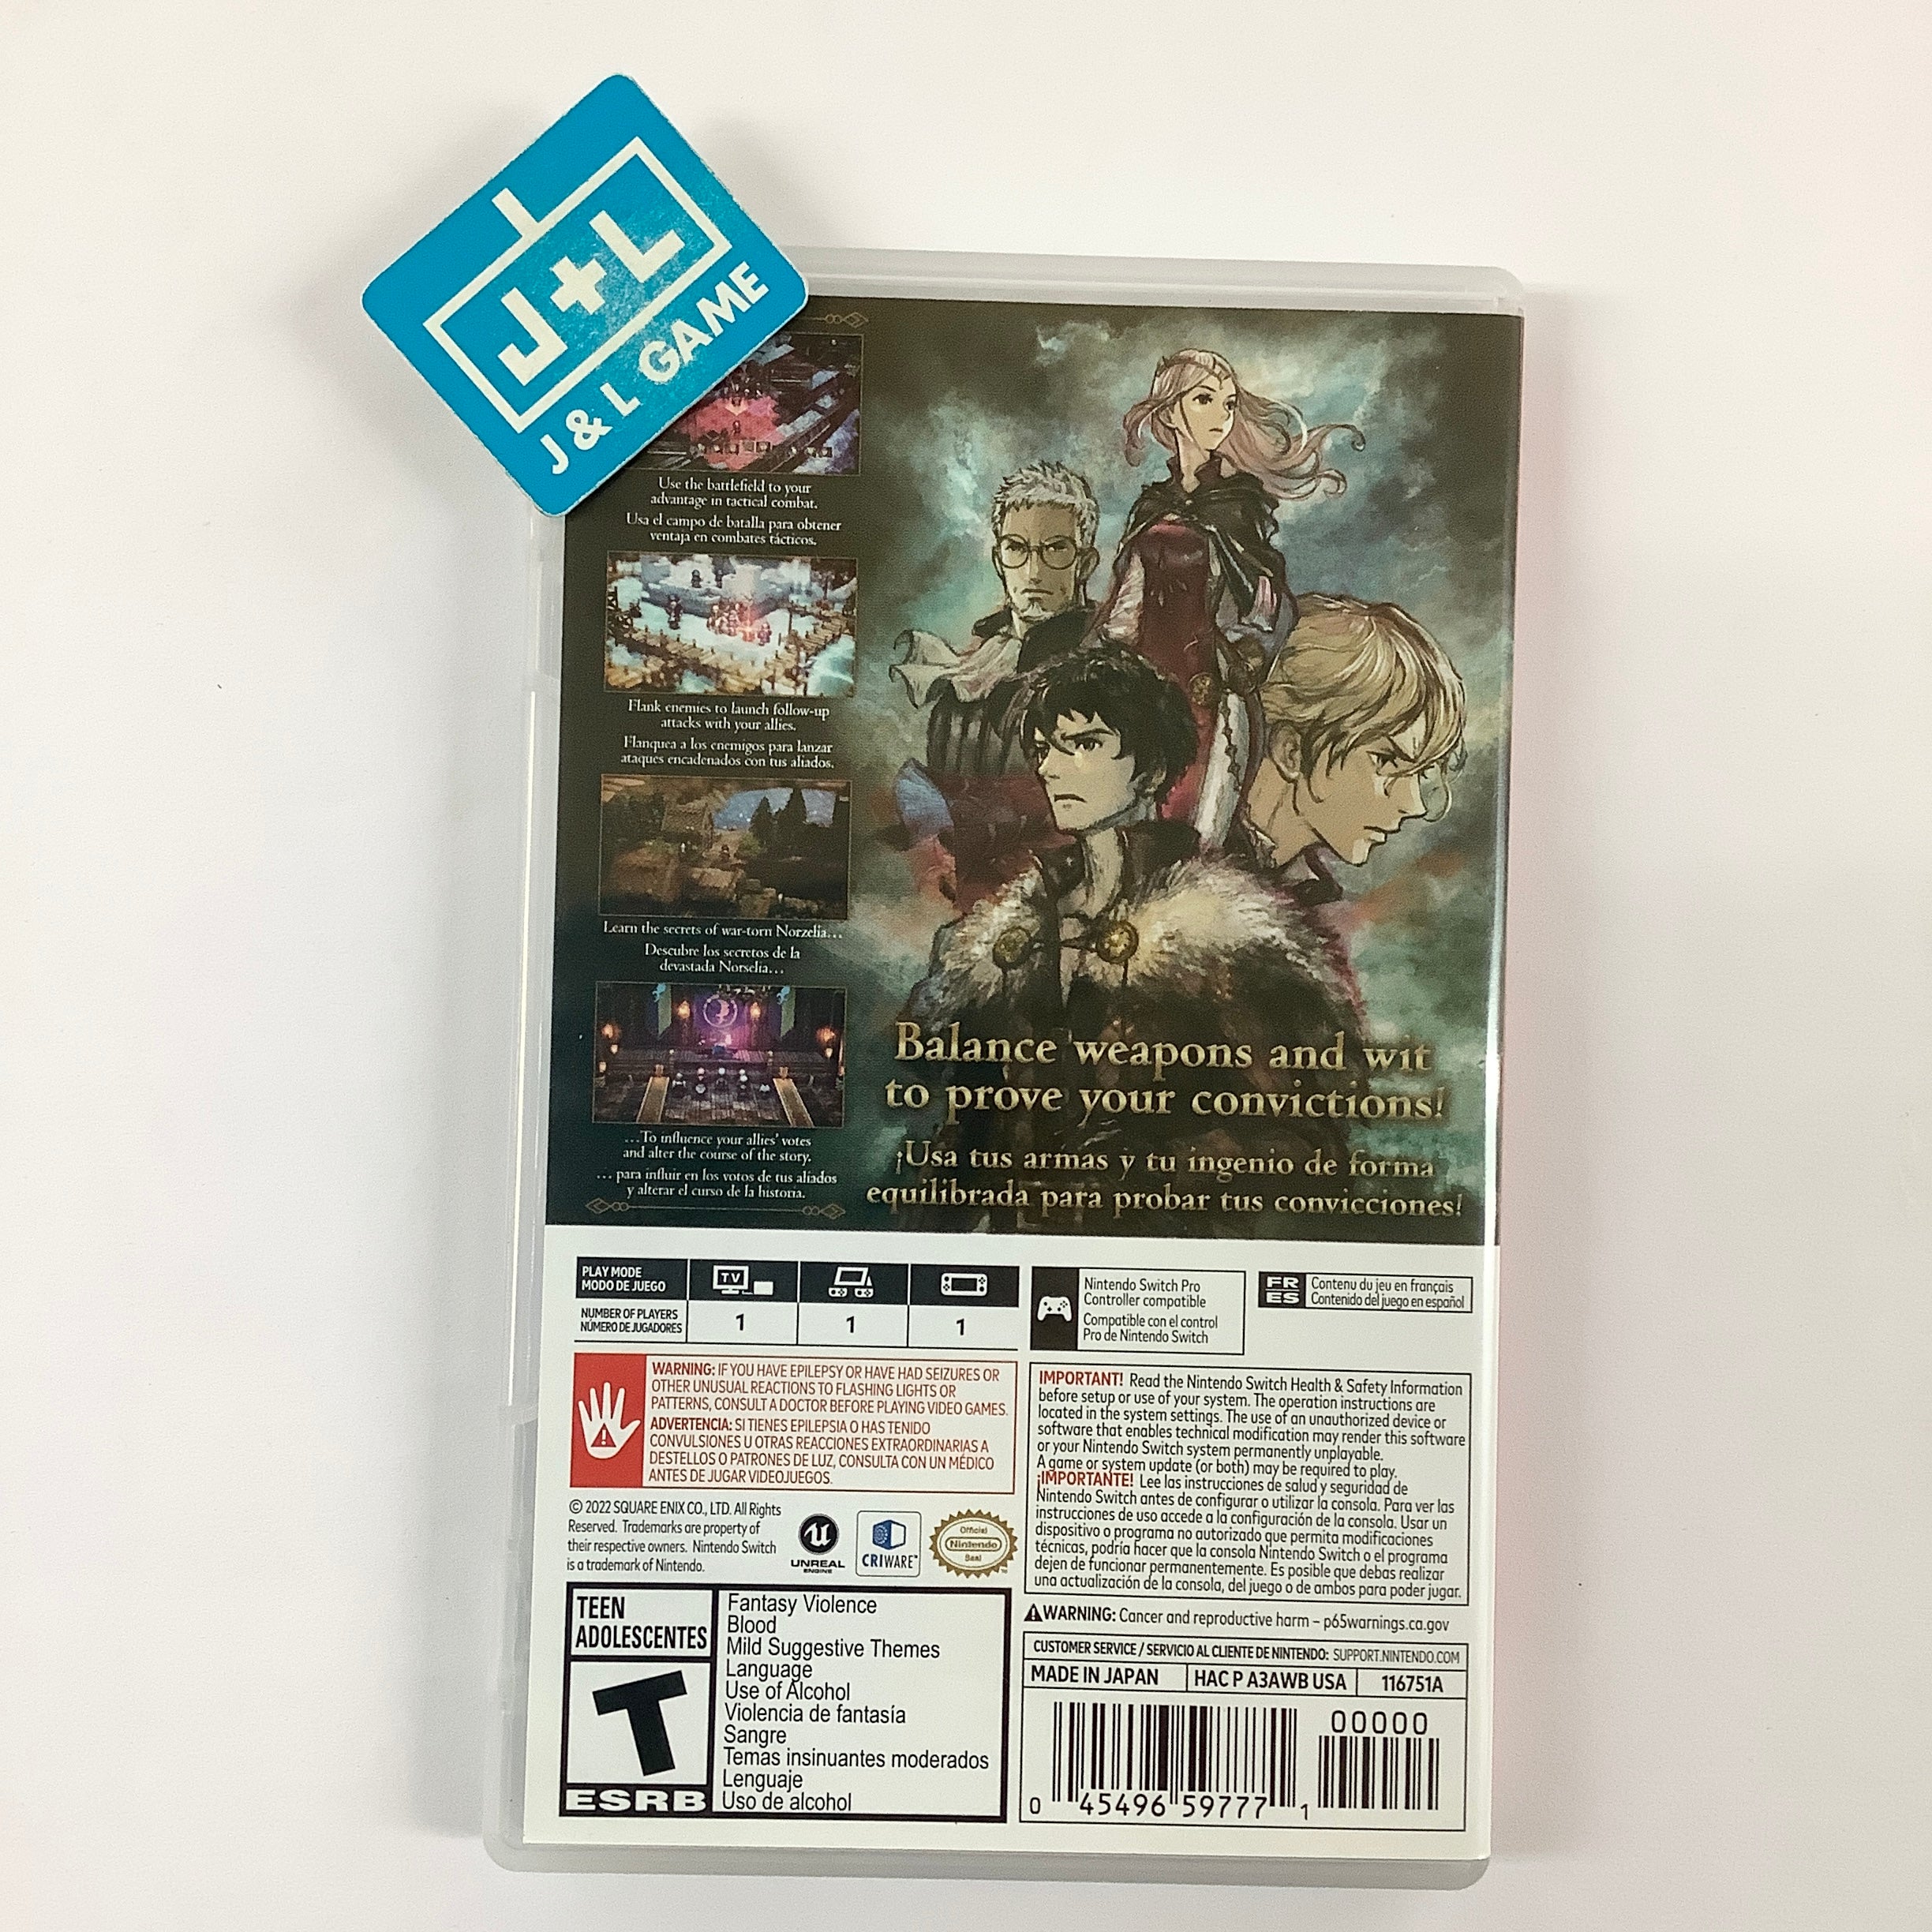 Triangle Strategy - (NSW) Nintendo Switch [Pre-Owned] Video Games Nintendo   